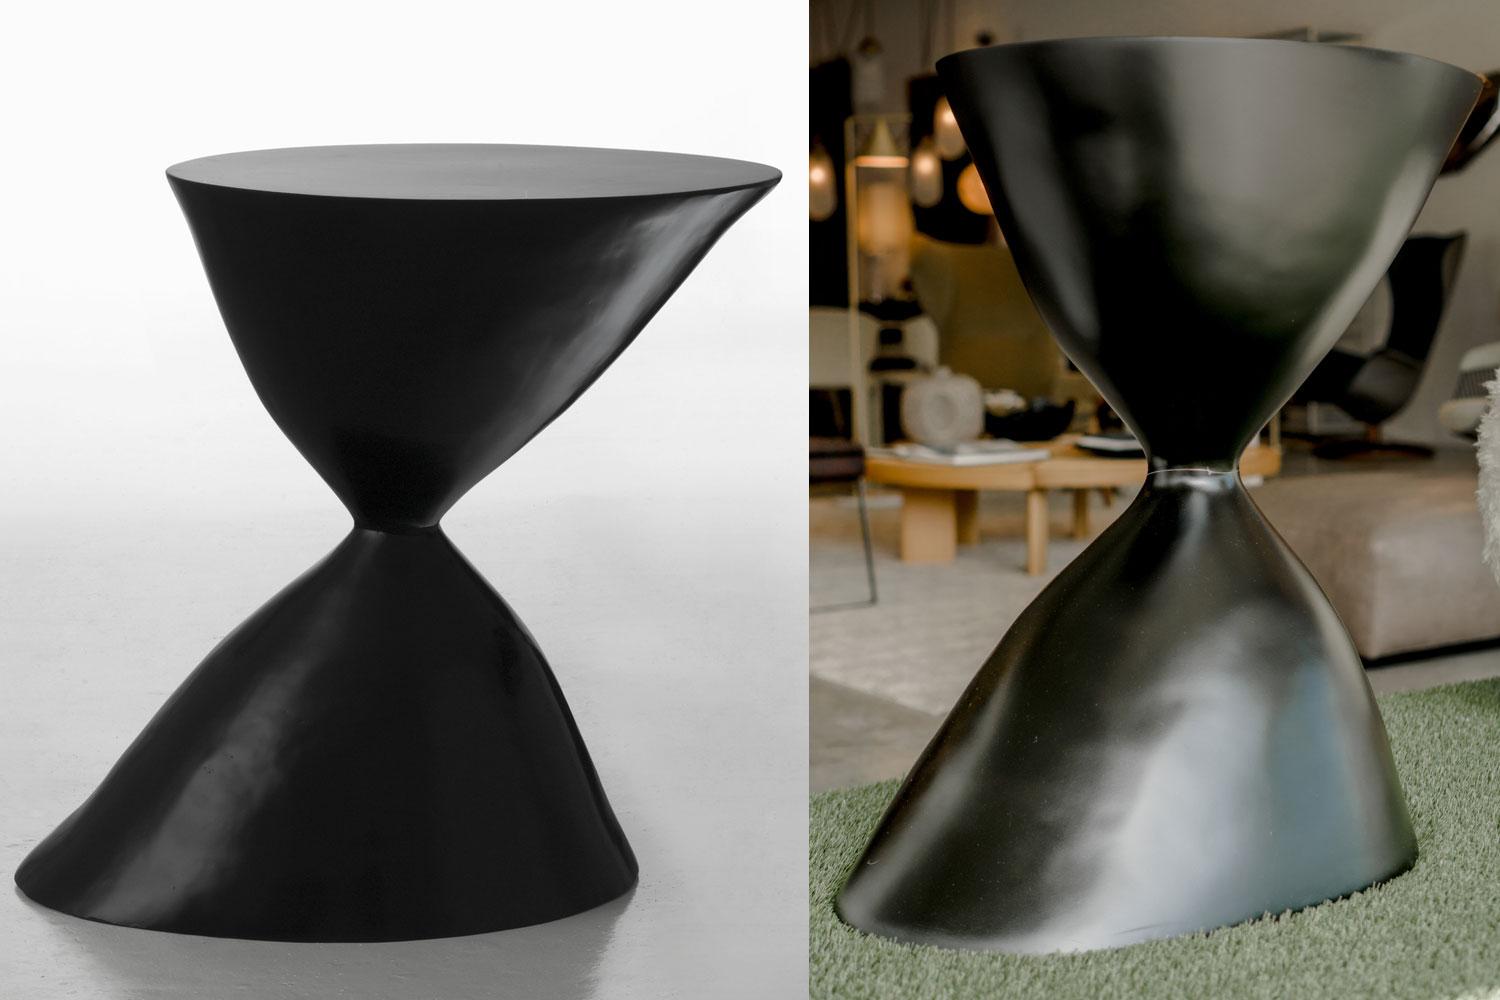 From the sketch on paper designer Verter Turroni mixes materials, shapes and colors to the definition of the object. Together with his family, Imperfetto Lab creates furniture that is durable, functional and artistic. The Bi side table is a black,